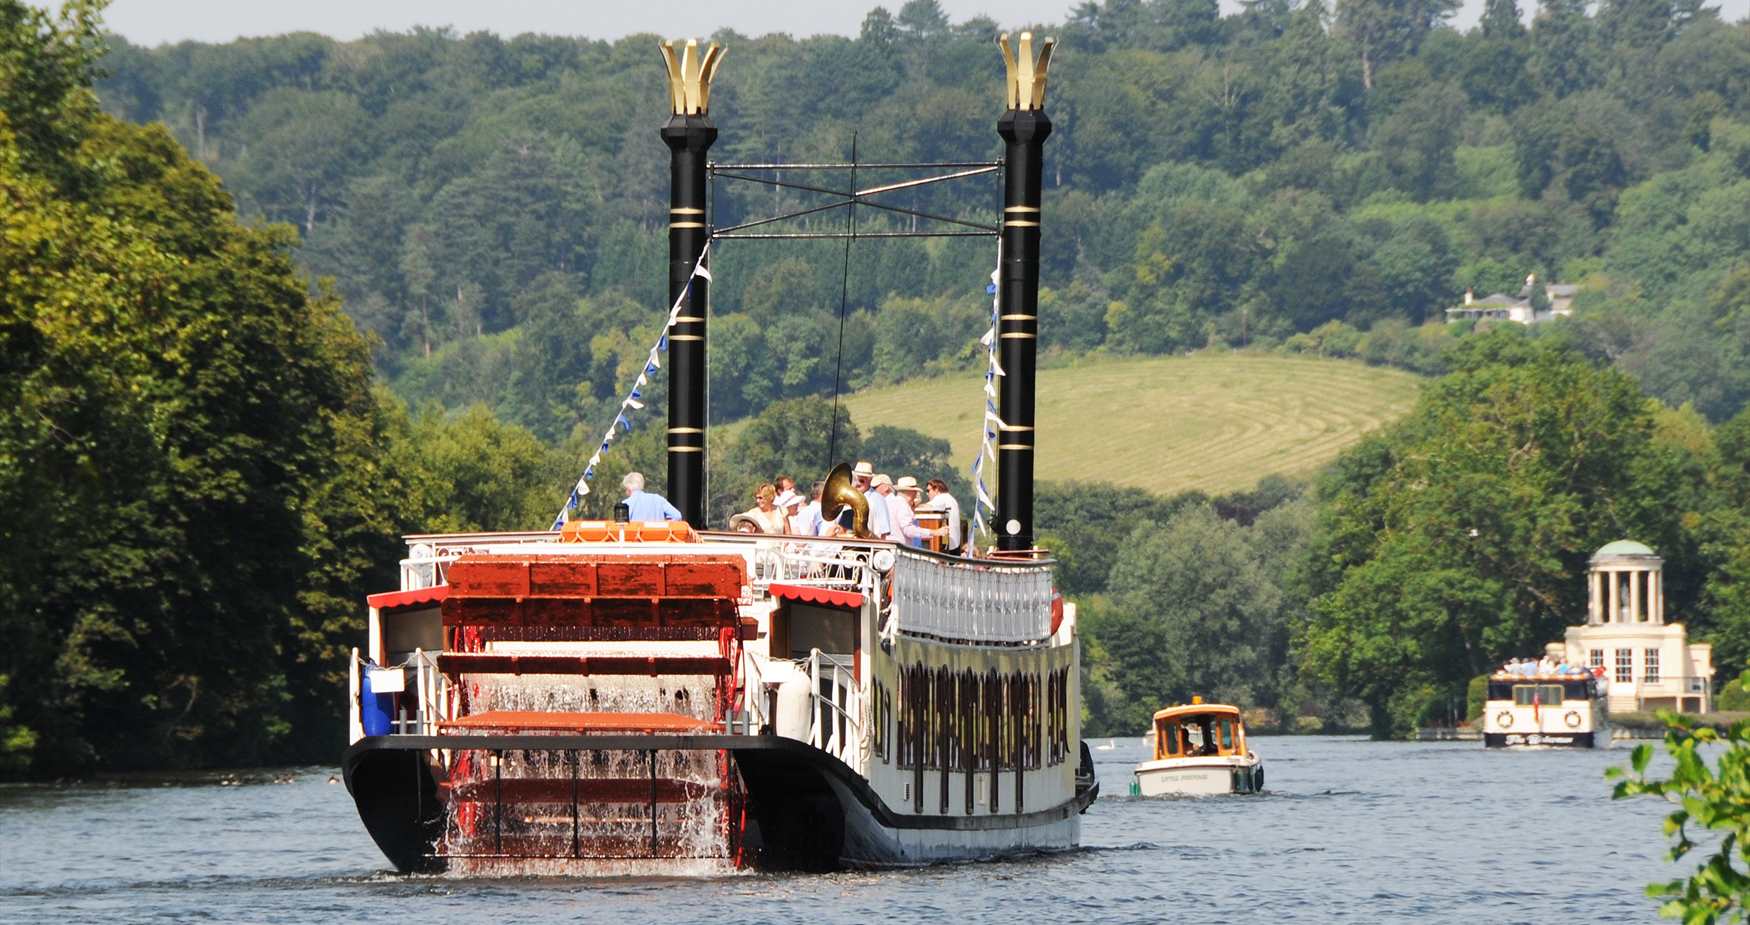 The New Orleans american style paddle steamer on the Thames at Henley.